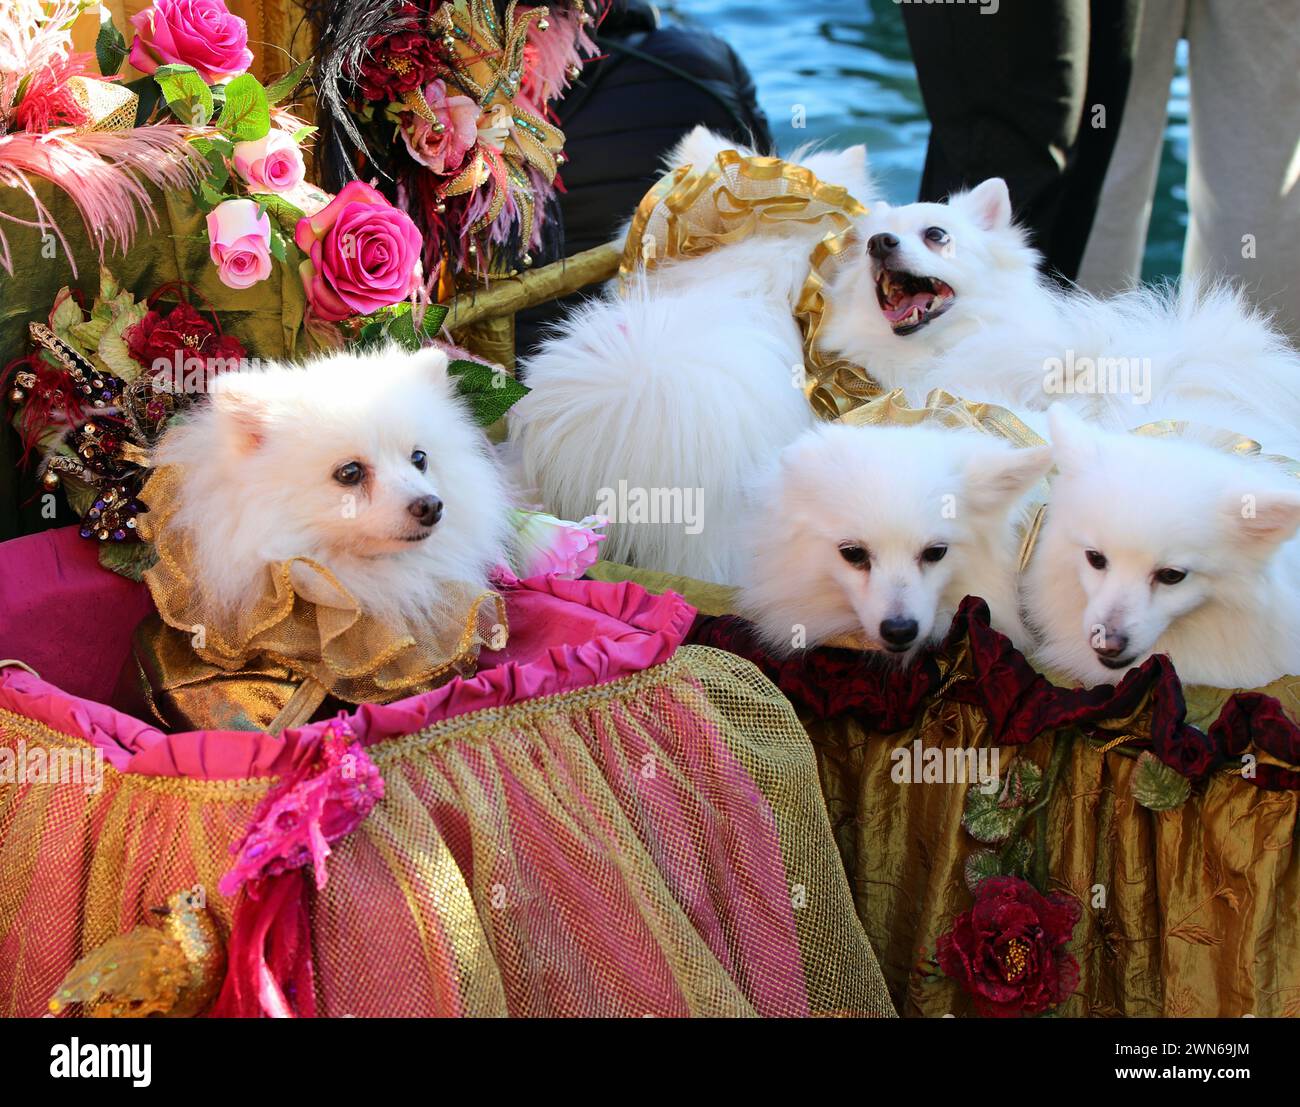 Pomeranian dog breed similar to small foxes during the carnival festival Stock Photo